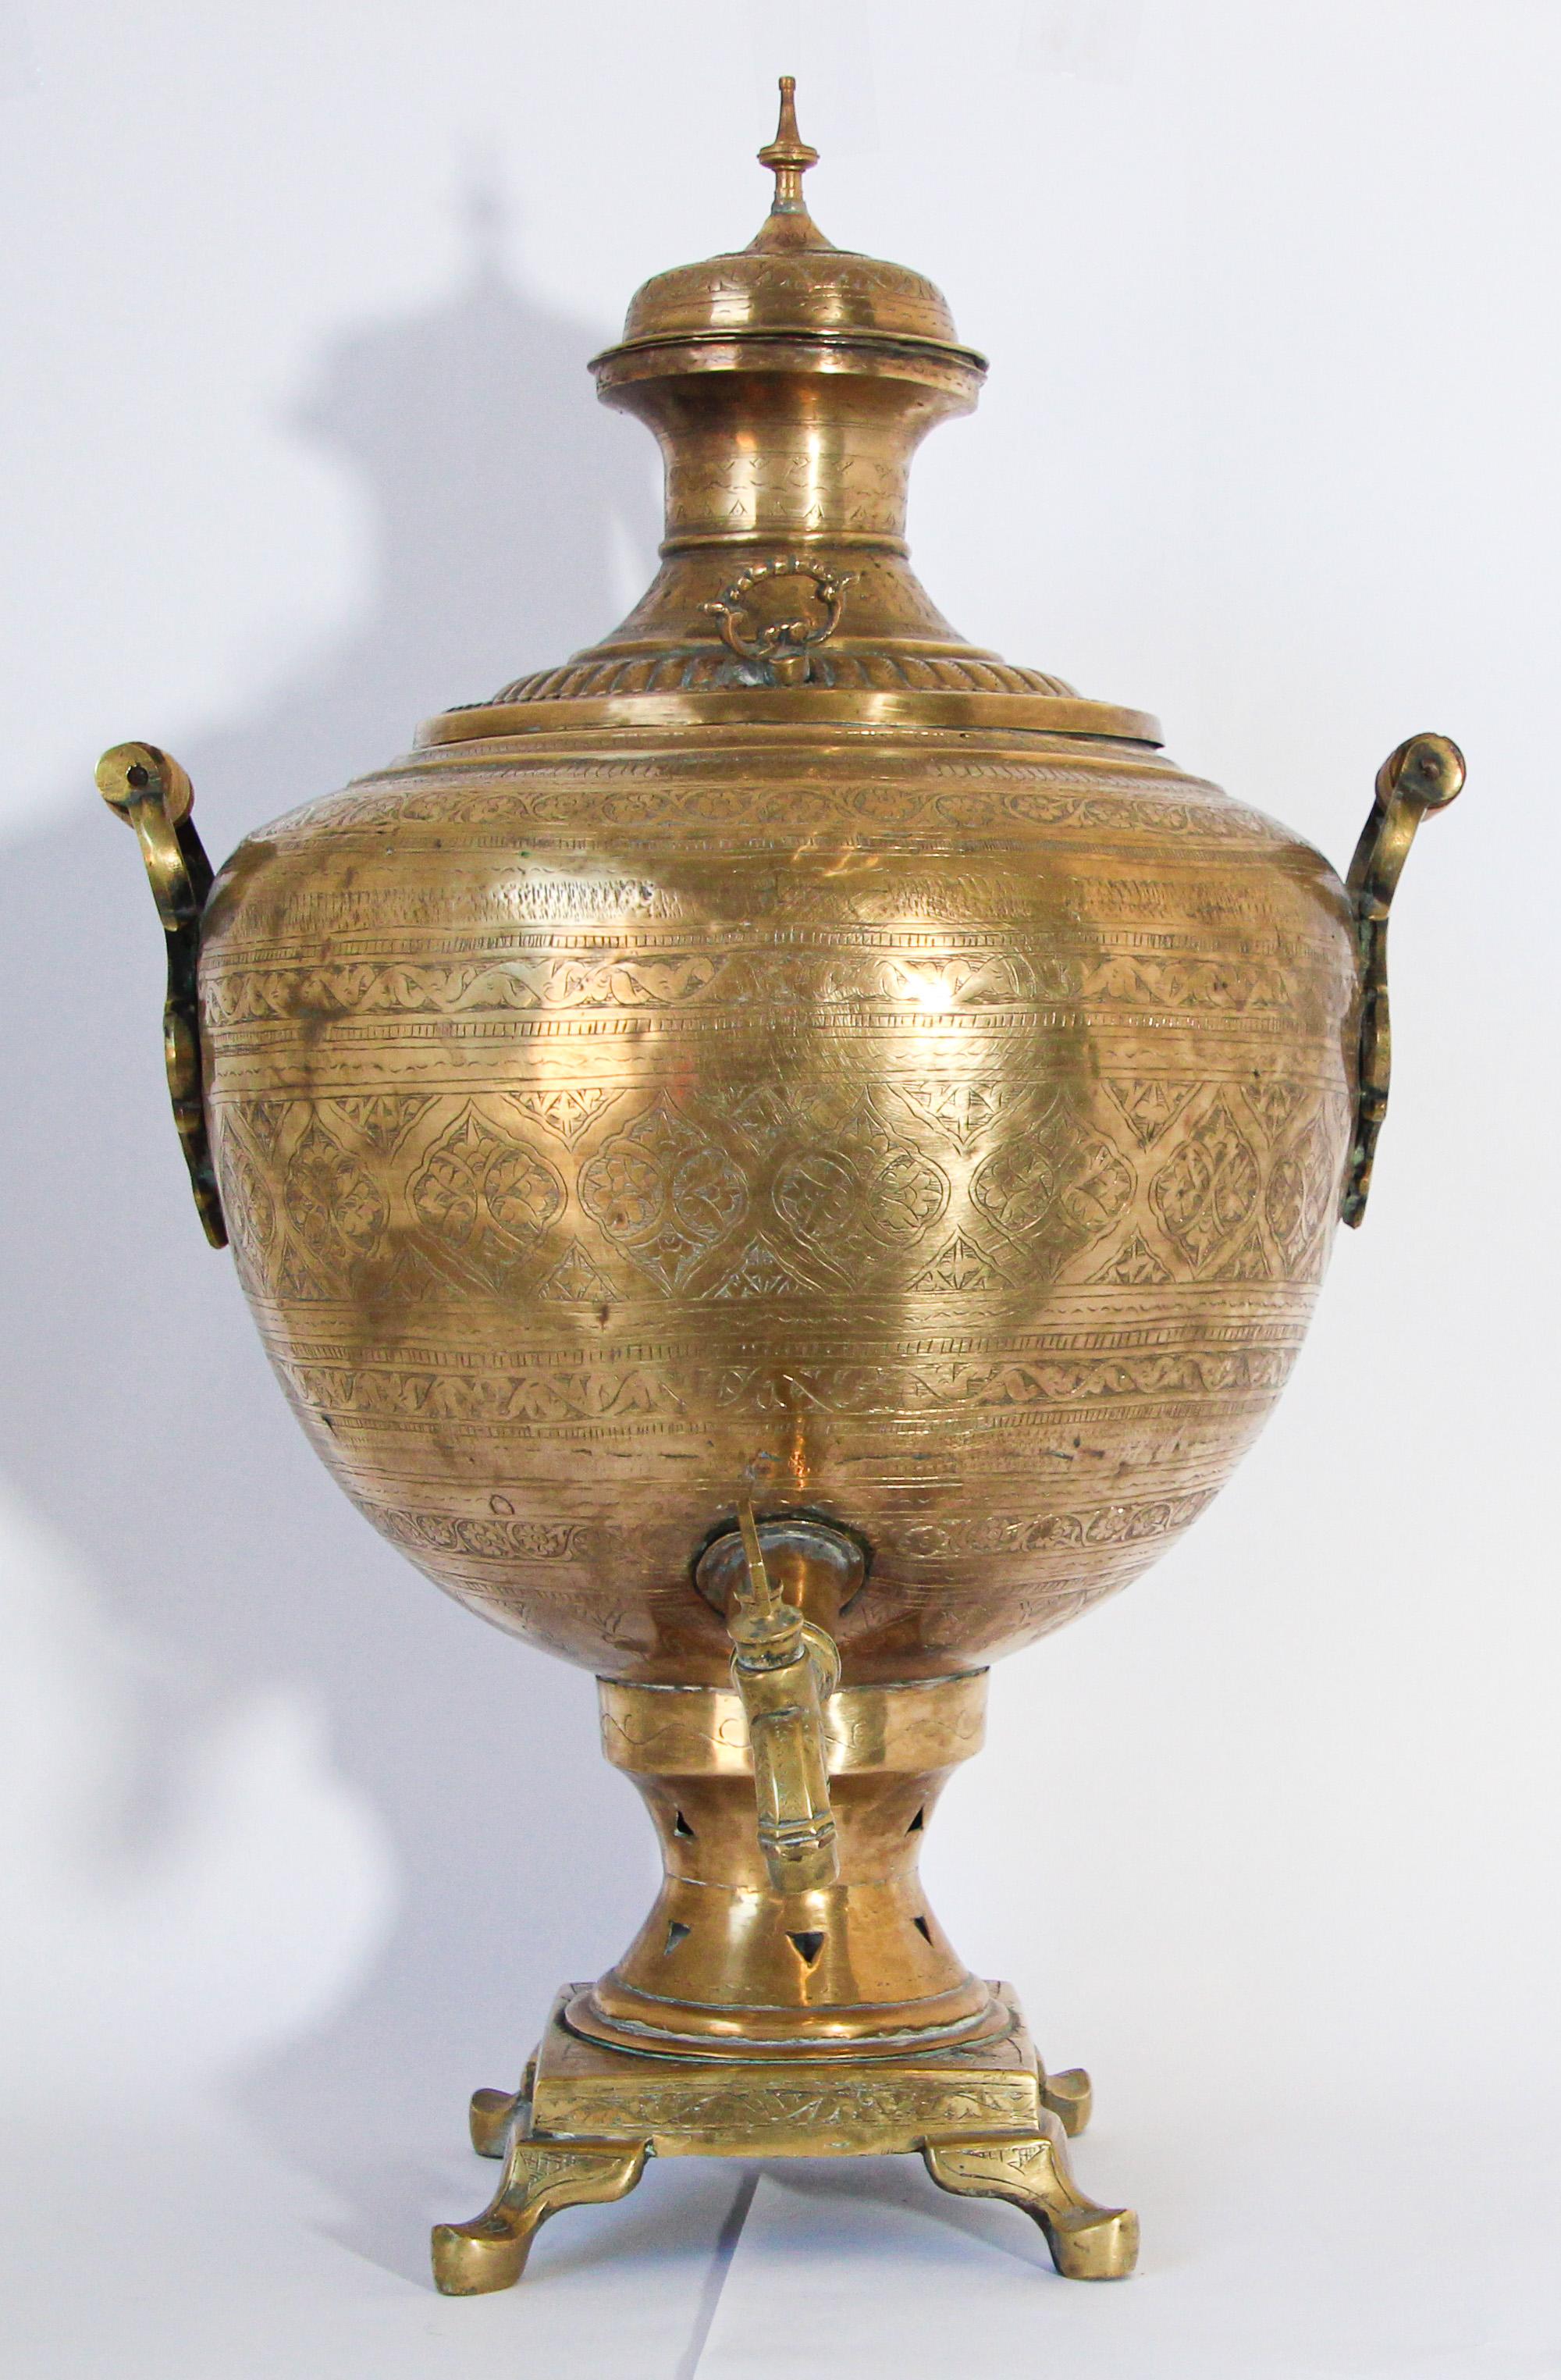 Exceptional large scale handcrafted  Mughal Indian brass samovar, tea kettle with finely etched and embossed floral designs.
Used in the Middle East, Indian, Turkey, Asia and North Africa, Morocco to boil water for tea or coffee.
Islamic style